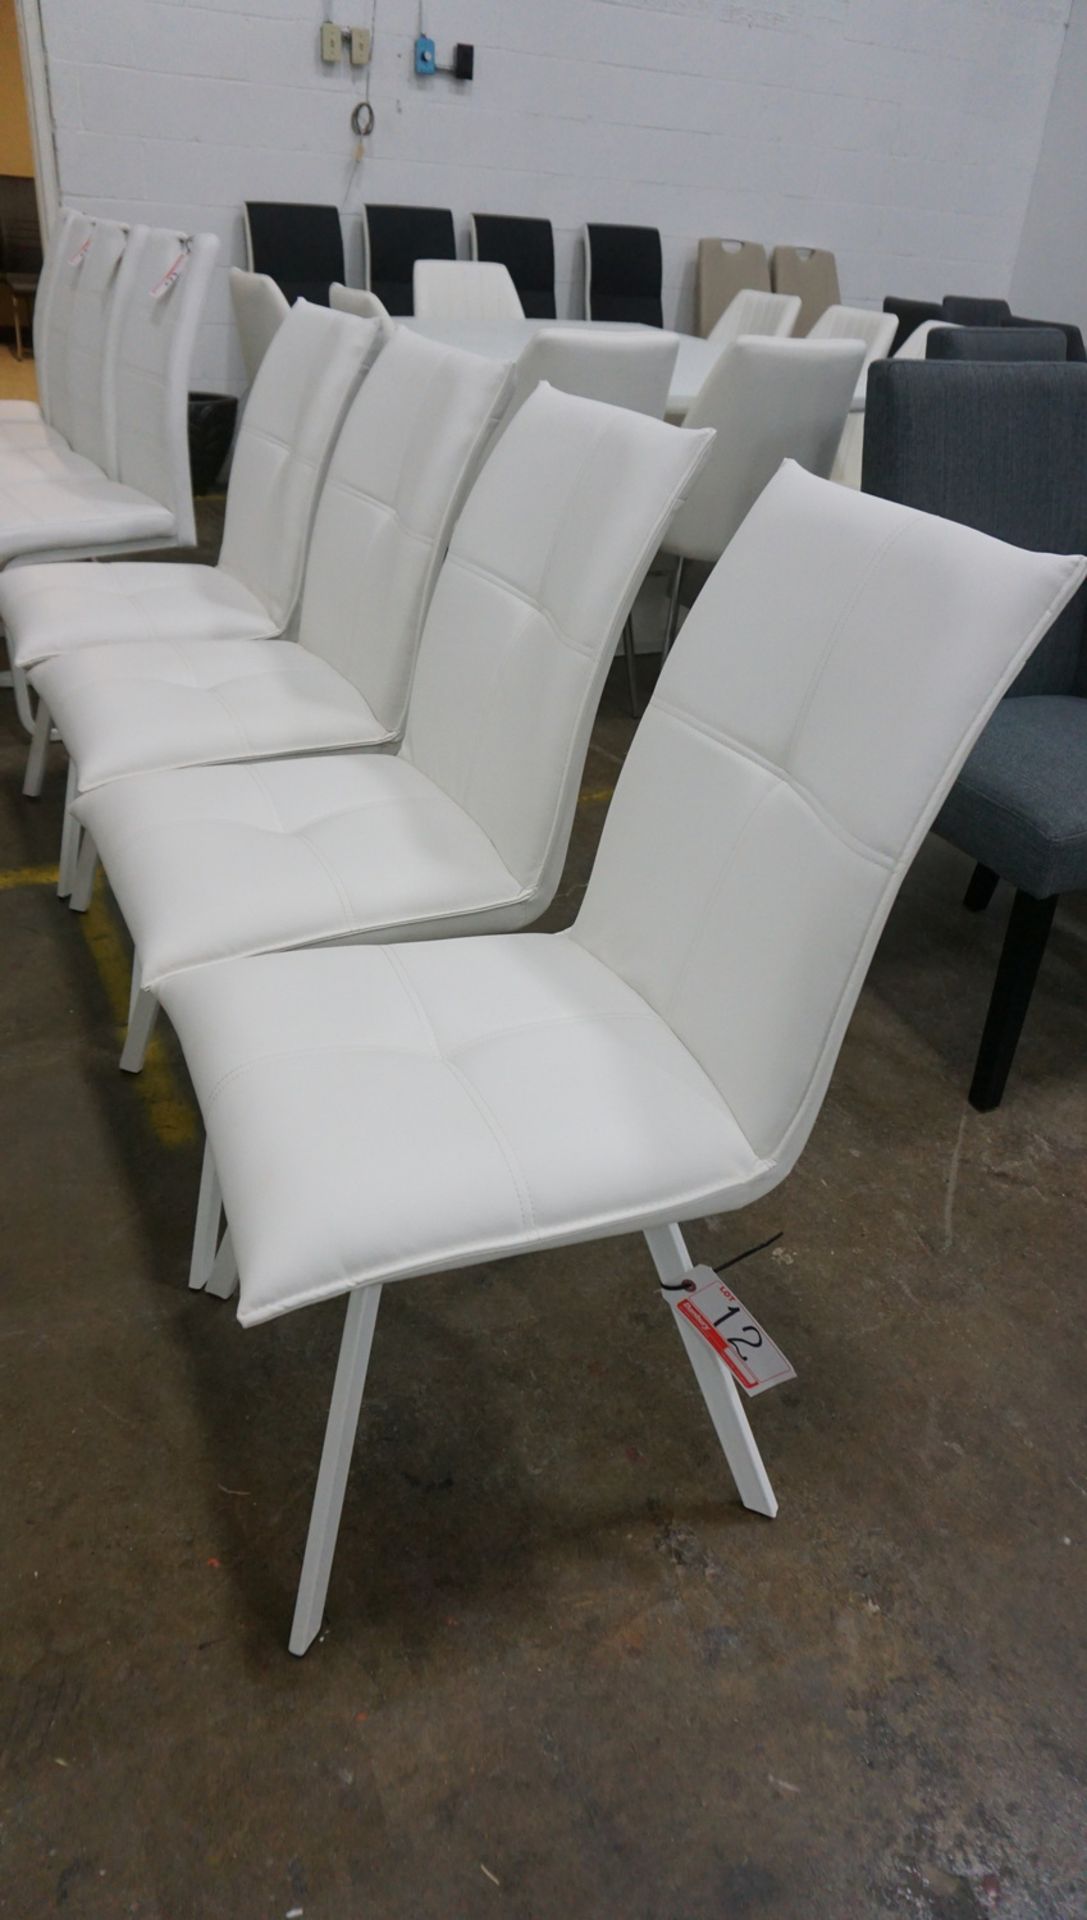 UNITS - WHITE PU LEATHER DINING CHAIRS